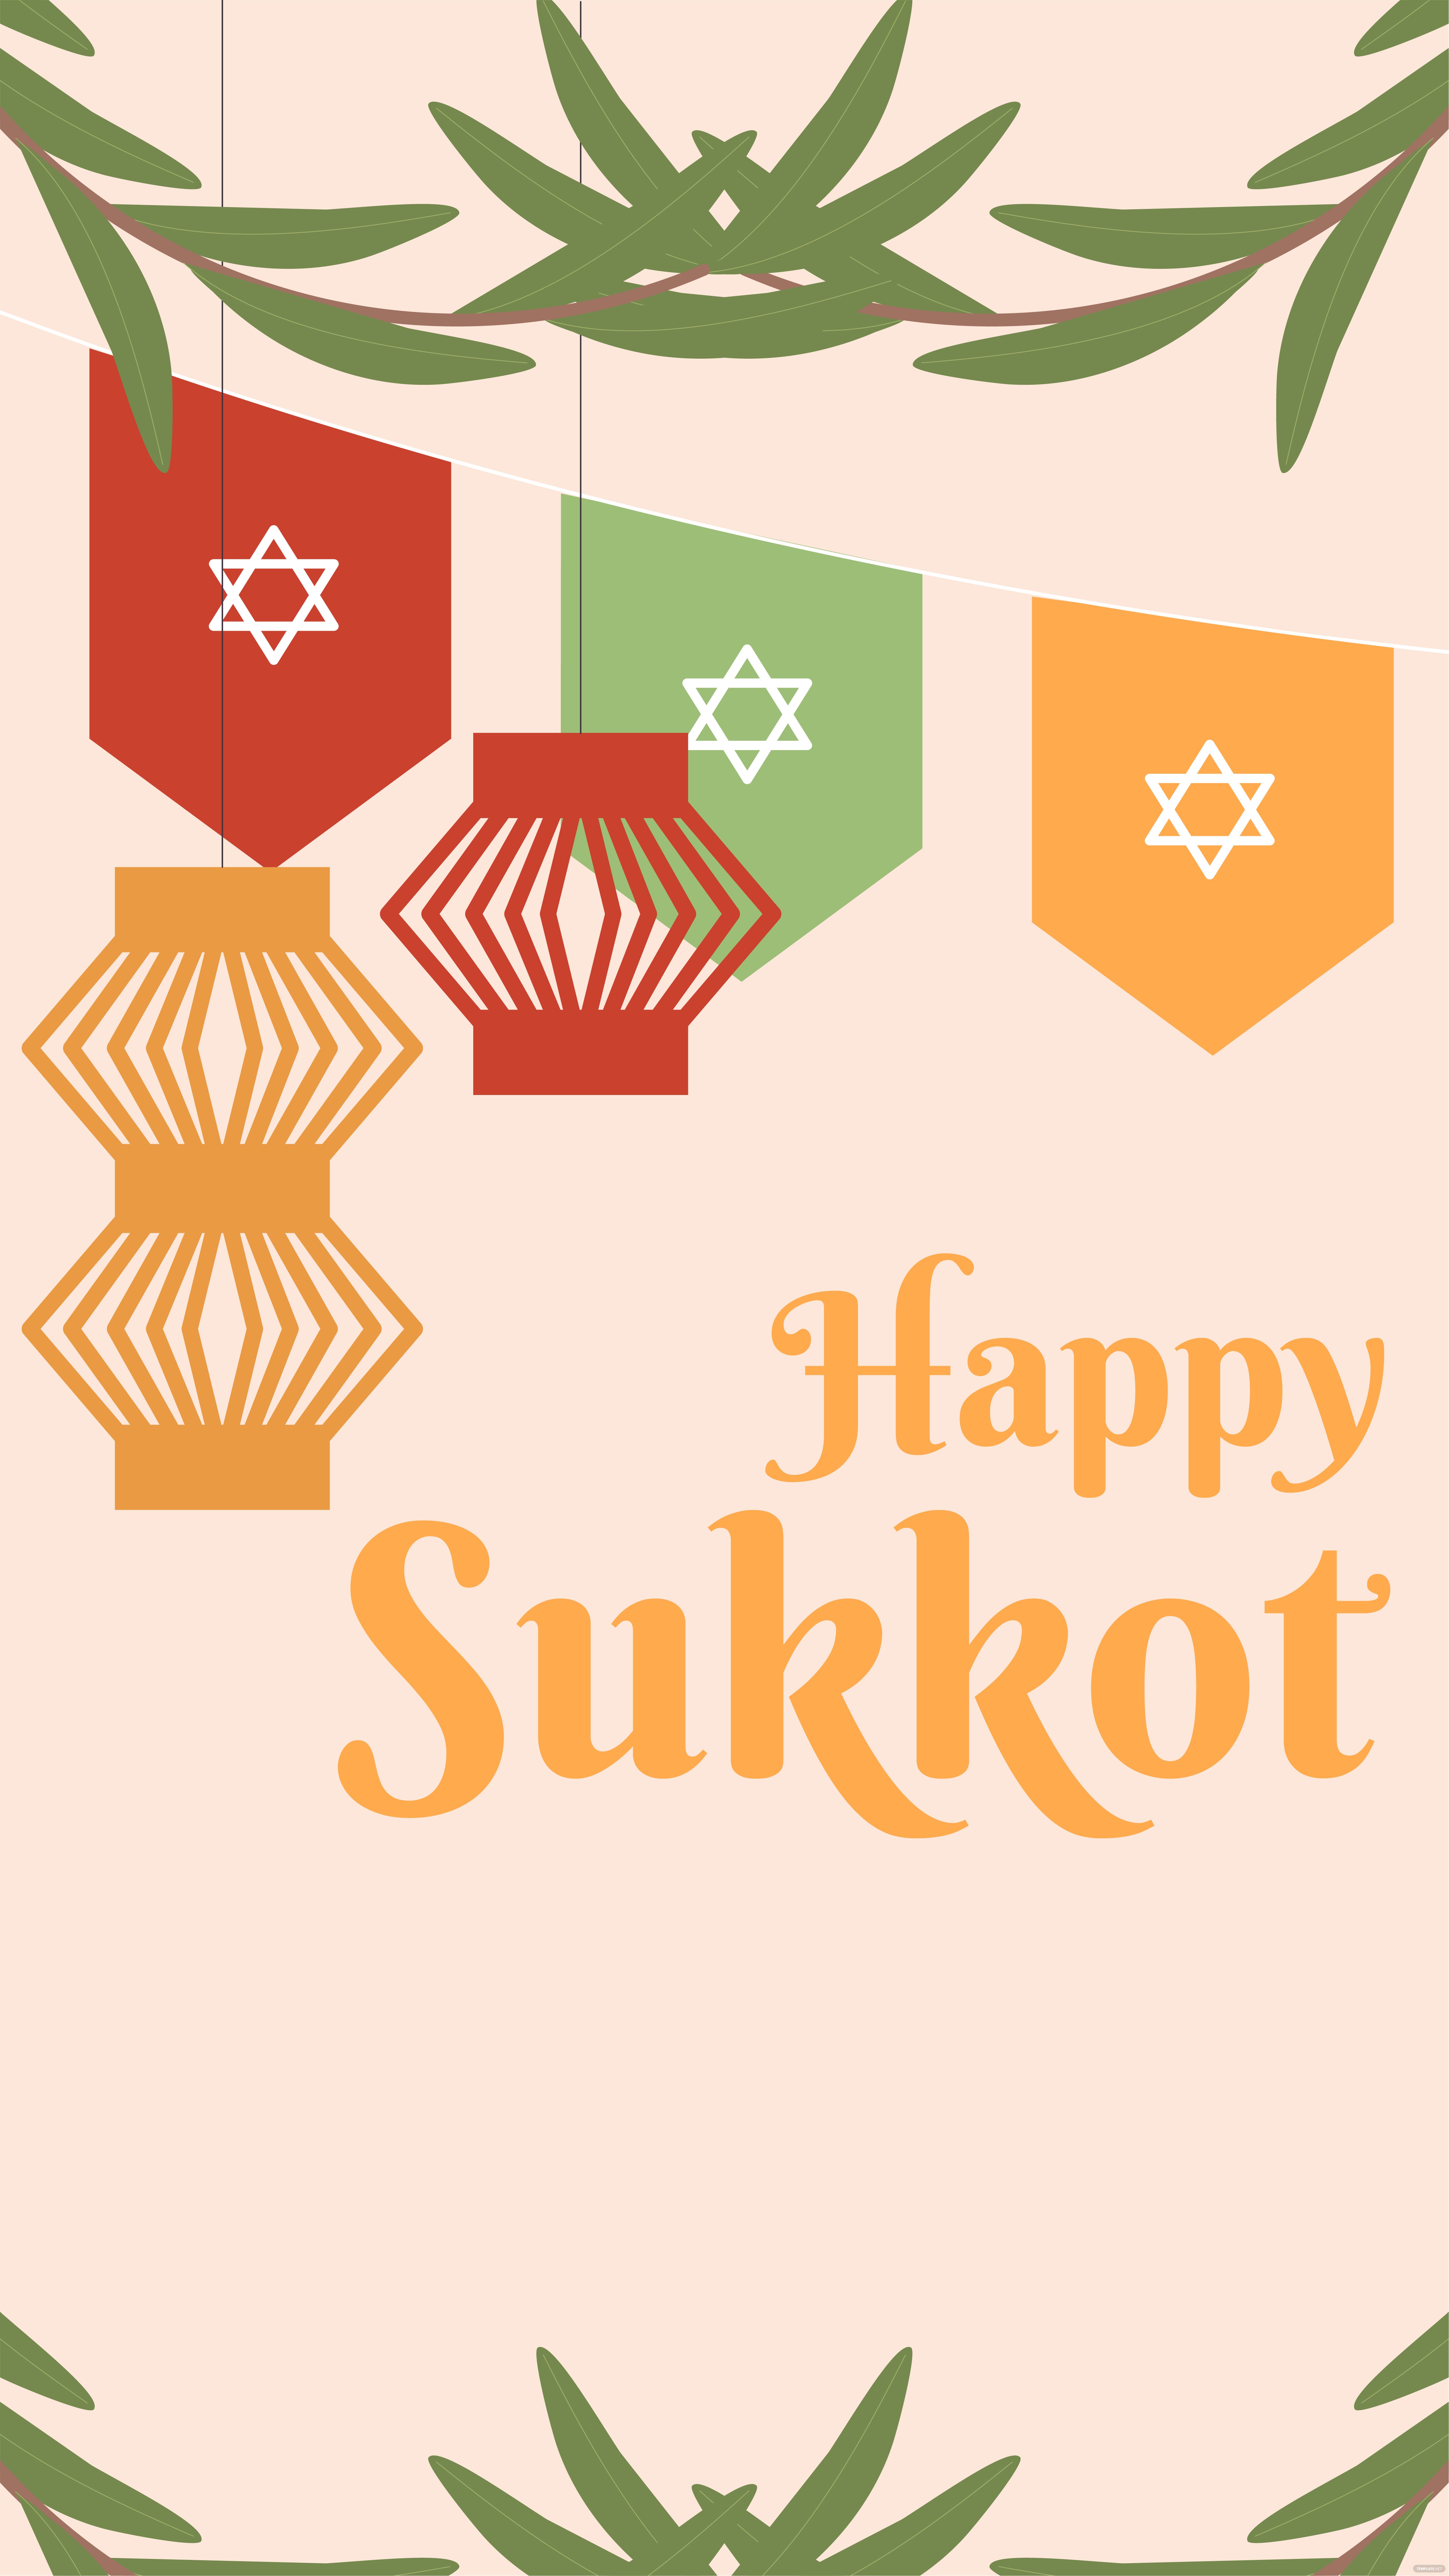 sukkot iphone background ideas and examples